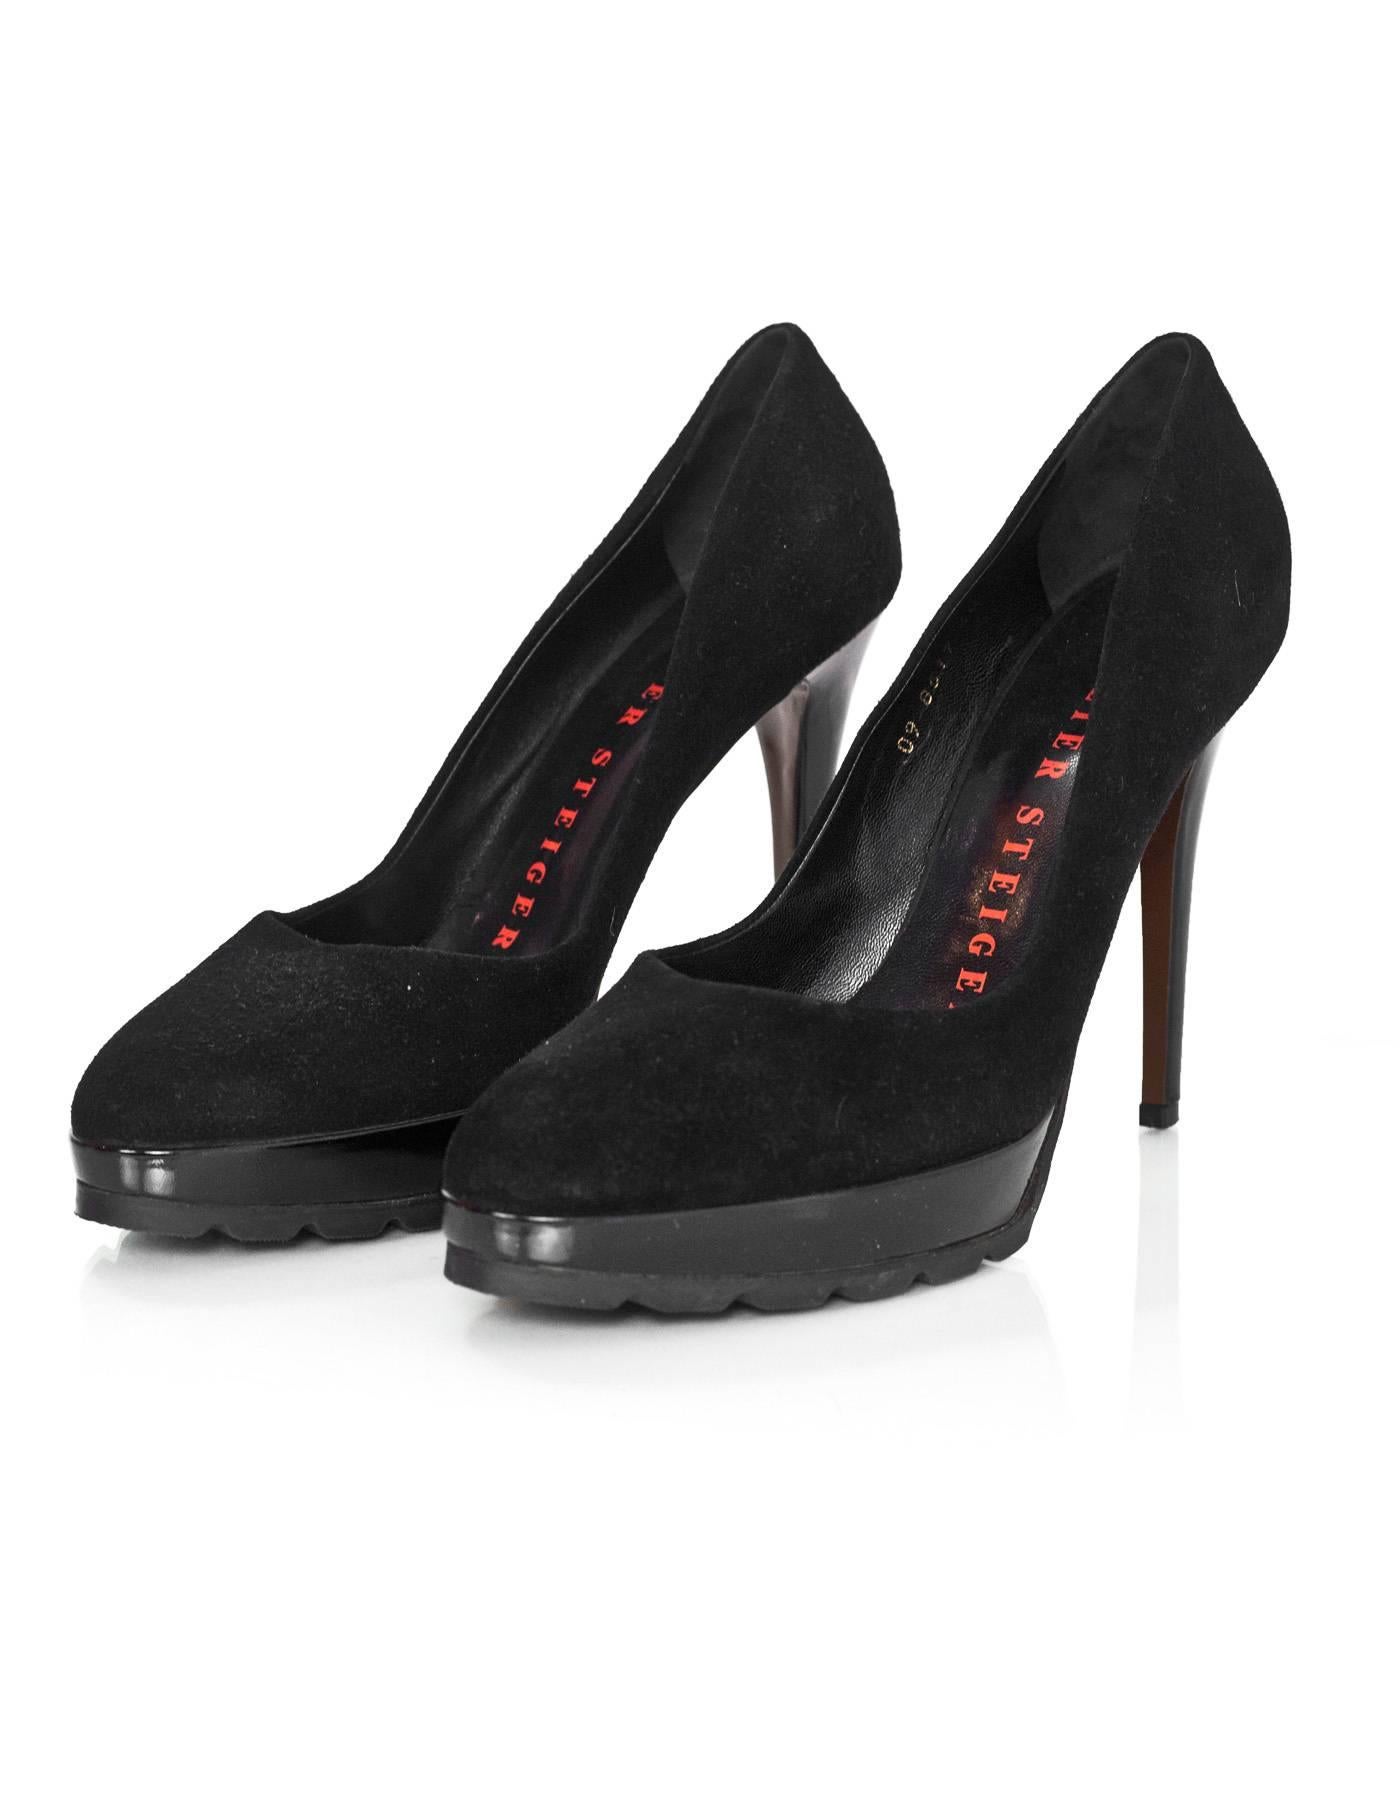 Walter Steiger Black Suede Platform Pumps
Features traction pad to soles and patent covered platform and heel

Made In: Italy
Color: Black
Materials: Suede 
Closure/Opening: Slip on
Sole Stamp: Walter Steiger Hand Mde in Italy 40
Overall Condition: